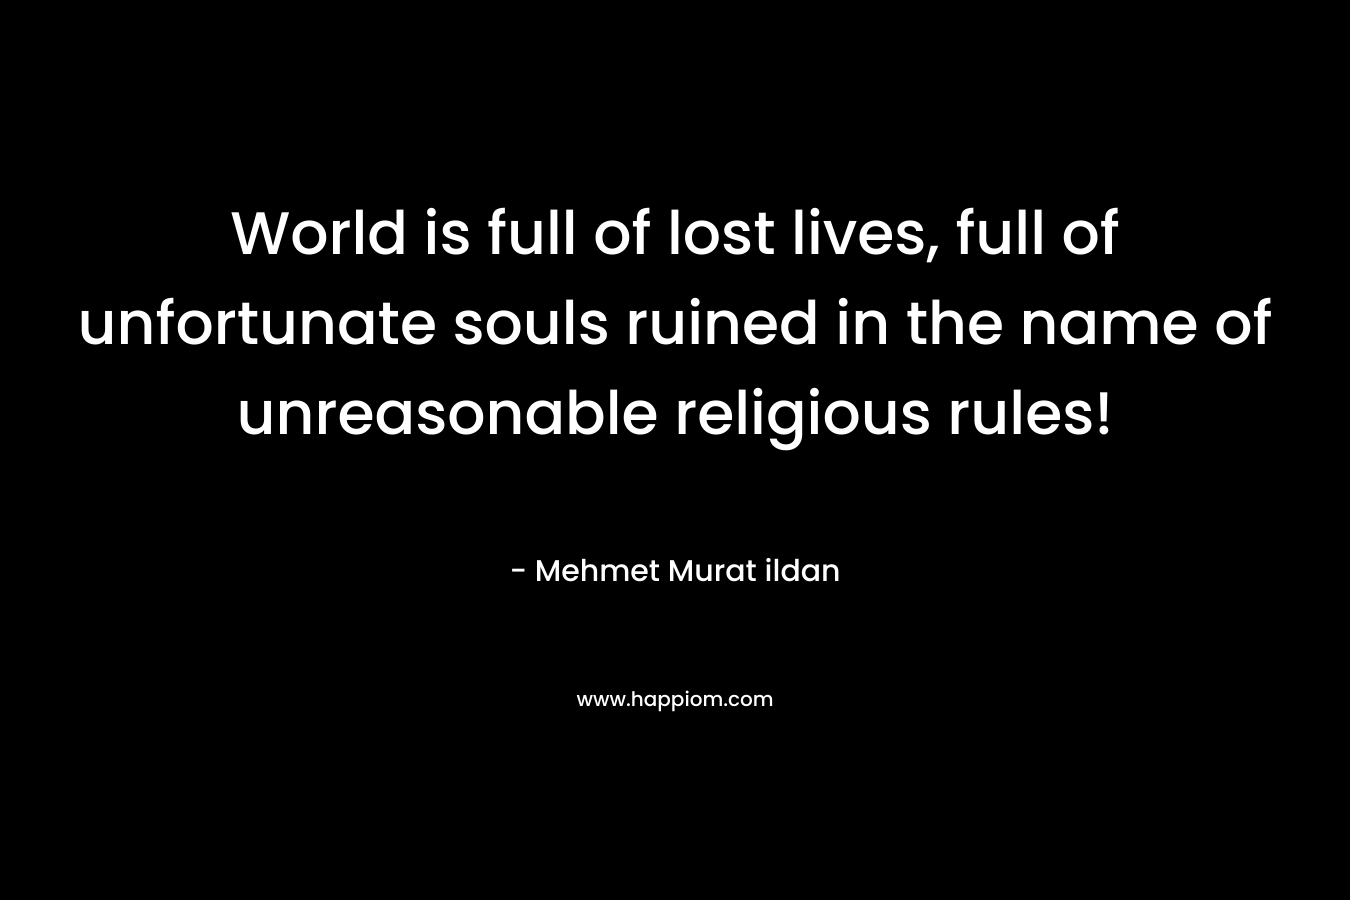 World is full of lost lives, full of unfortunate souls ruined in the name of unreasonable religious rules!